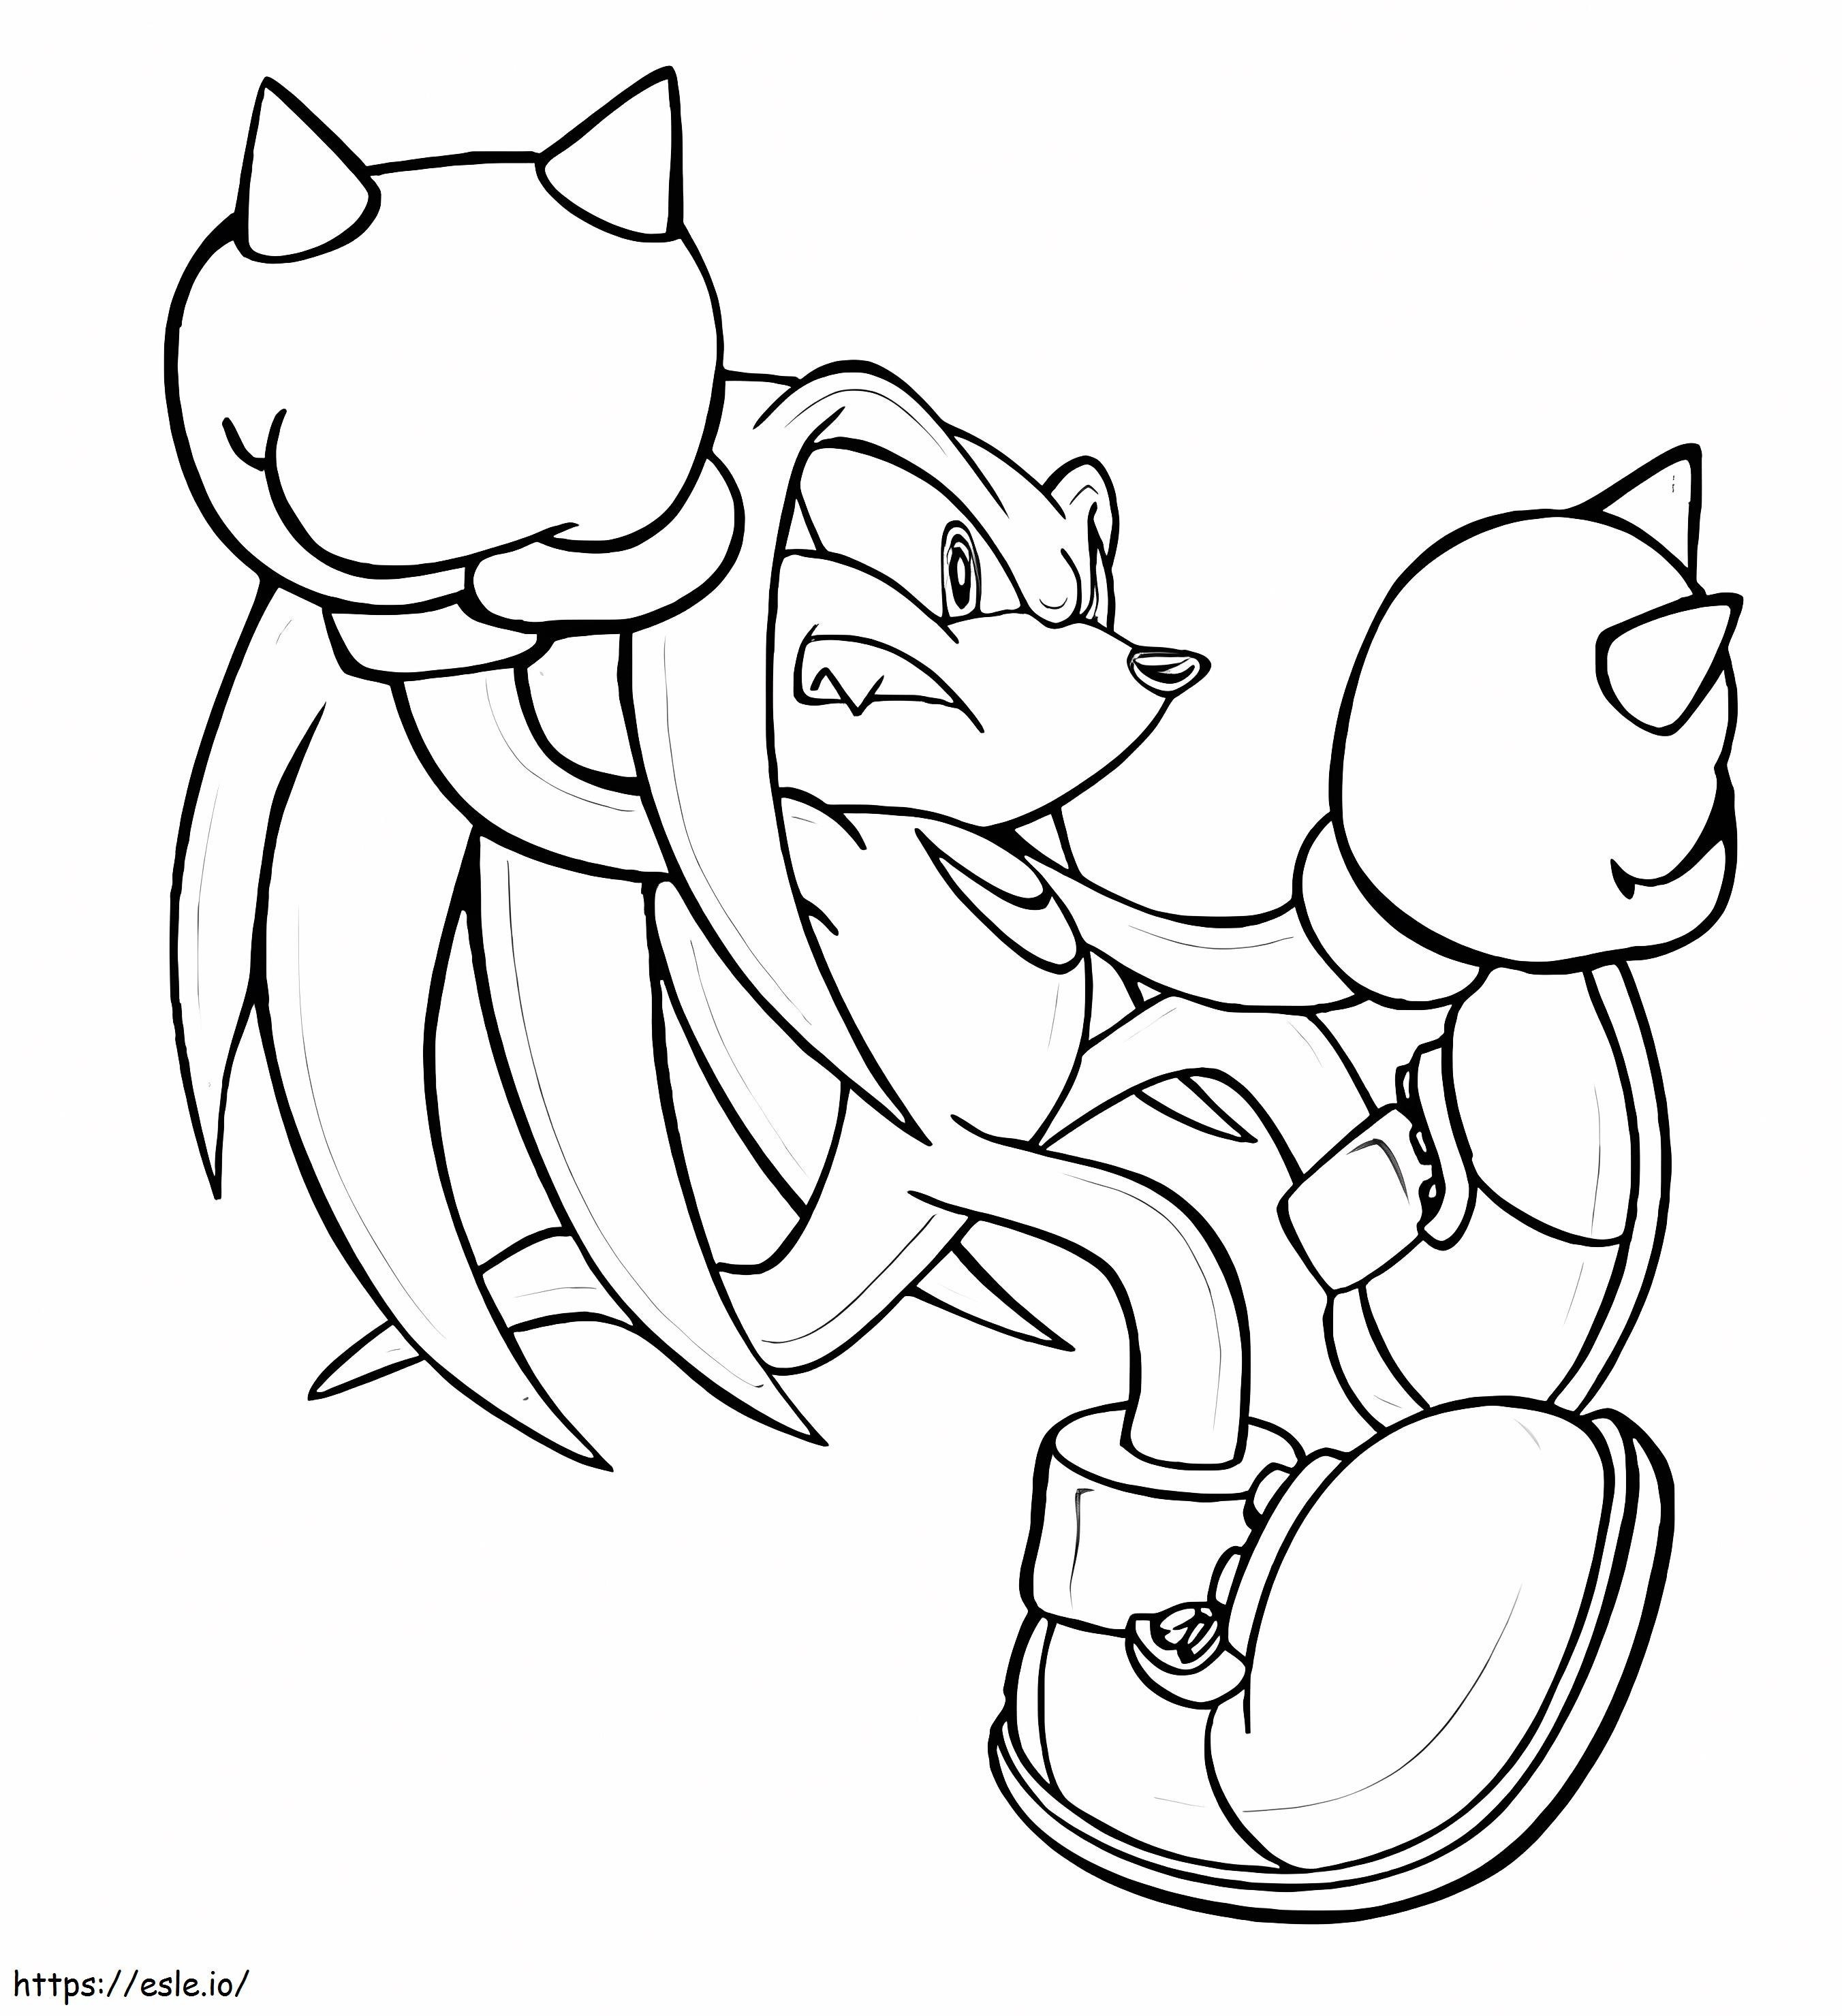 Knuckles The Echidna To Color coloring page